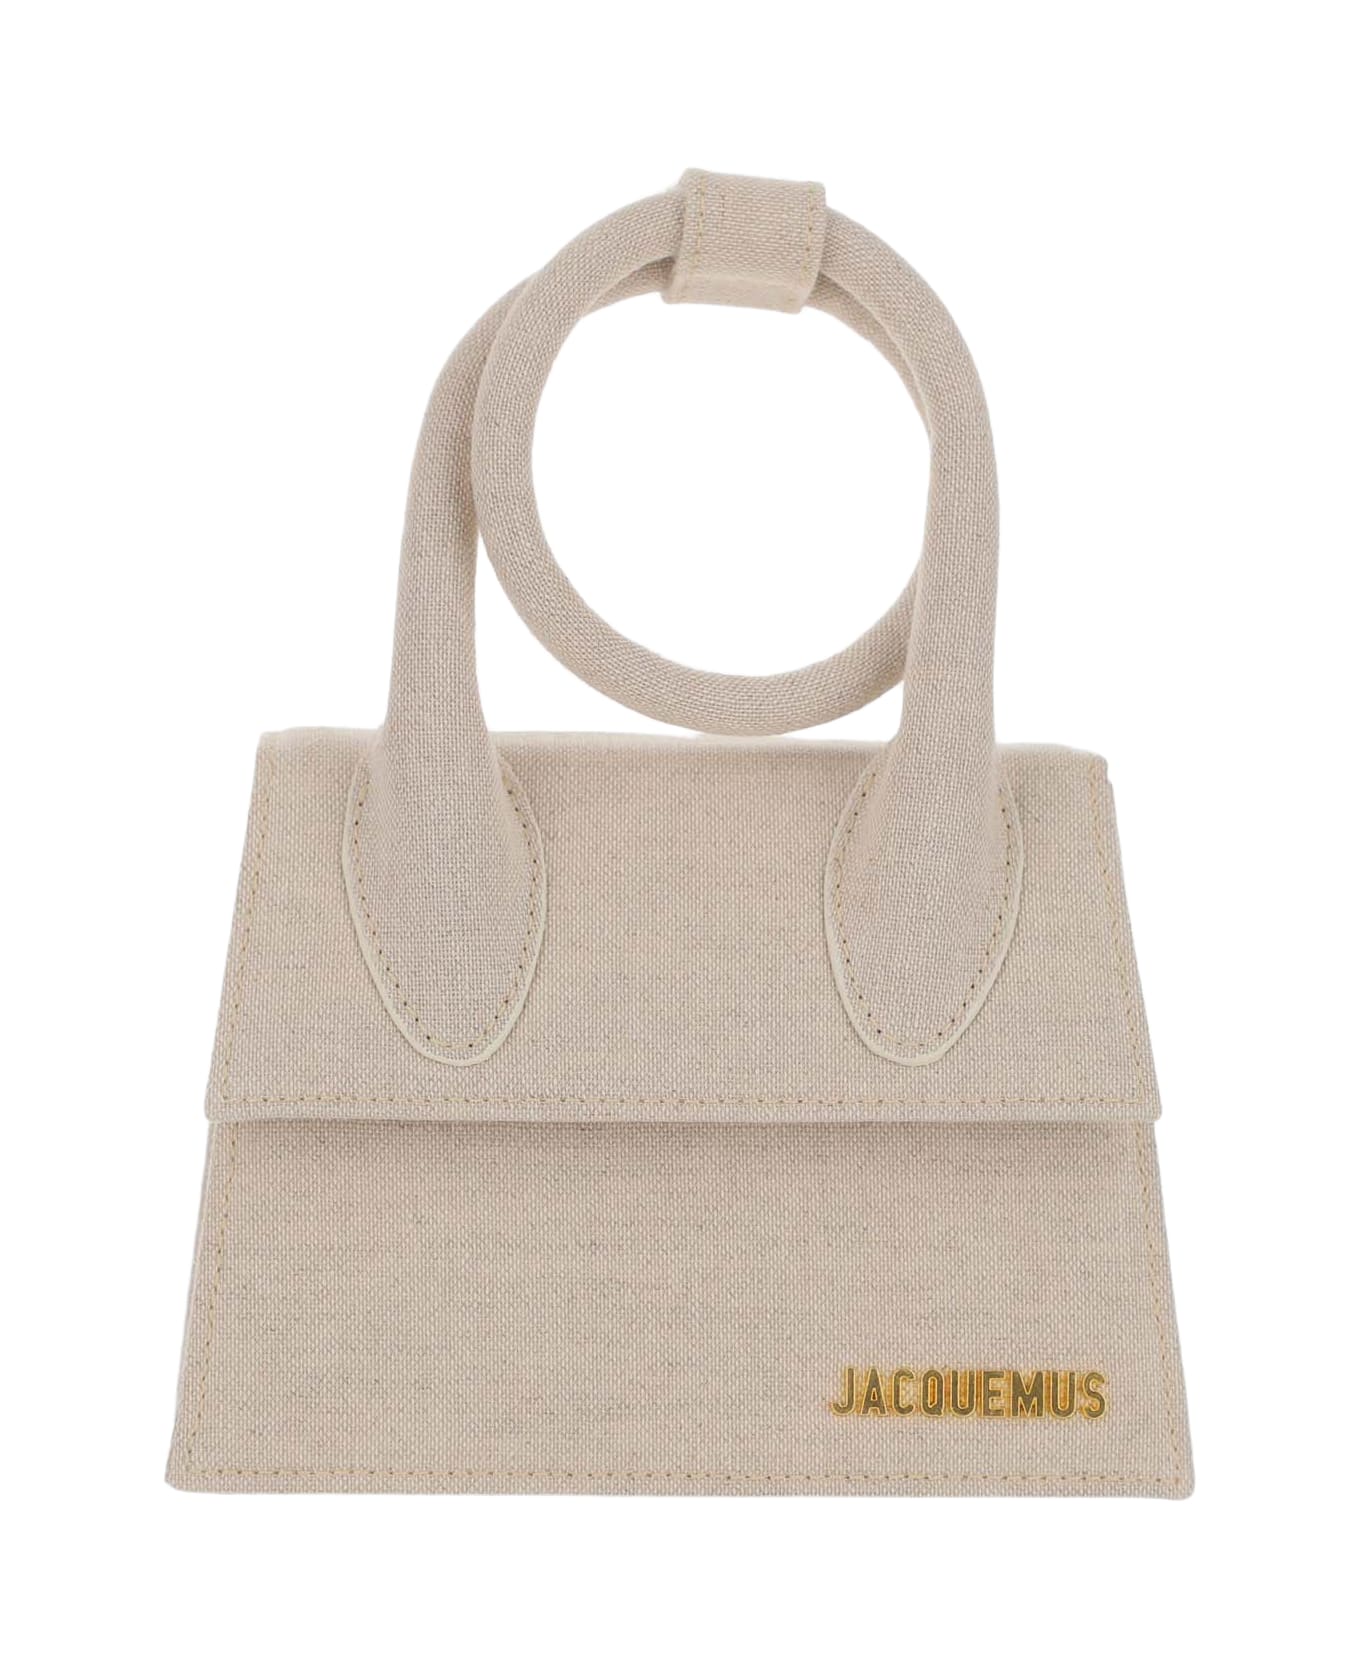 Jacquemus Le Chiquito Noeud Bag - LIGHT GREIGE トートバッグ